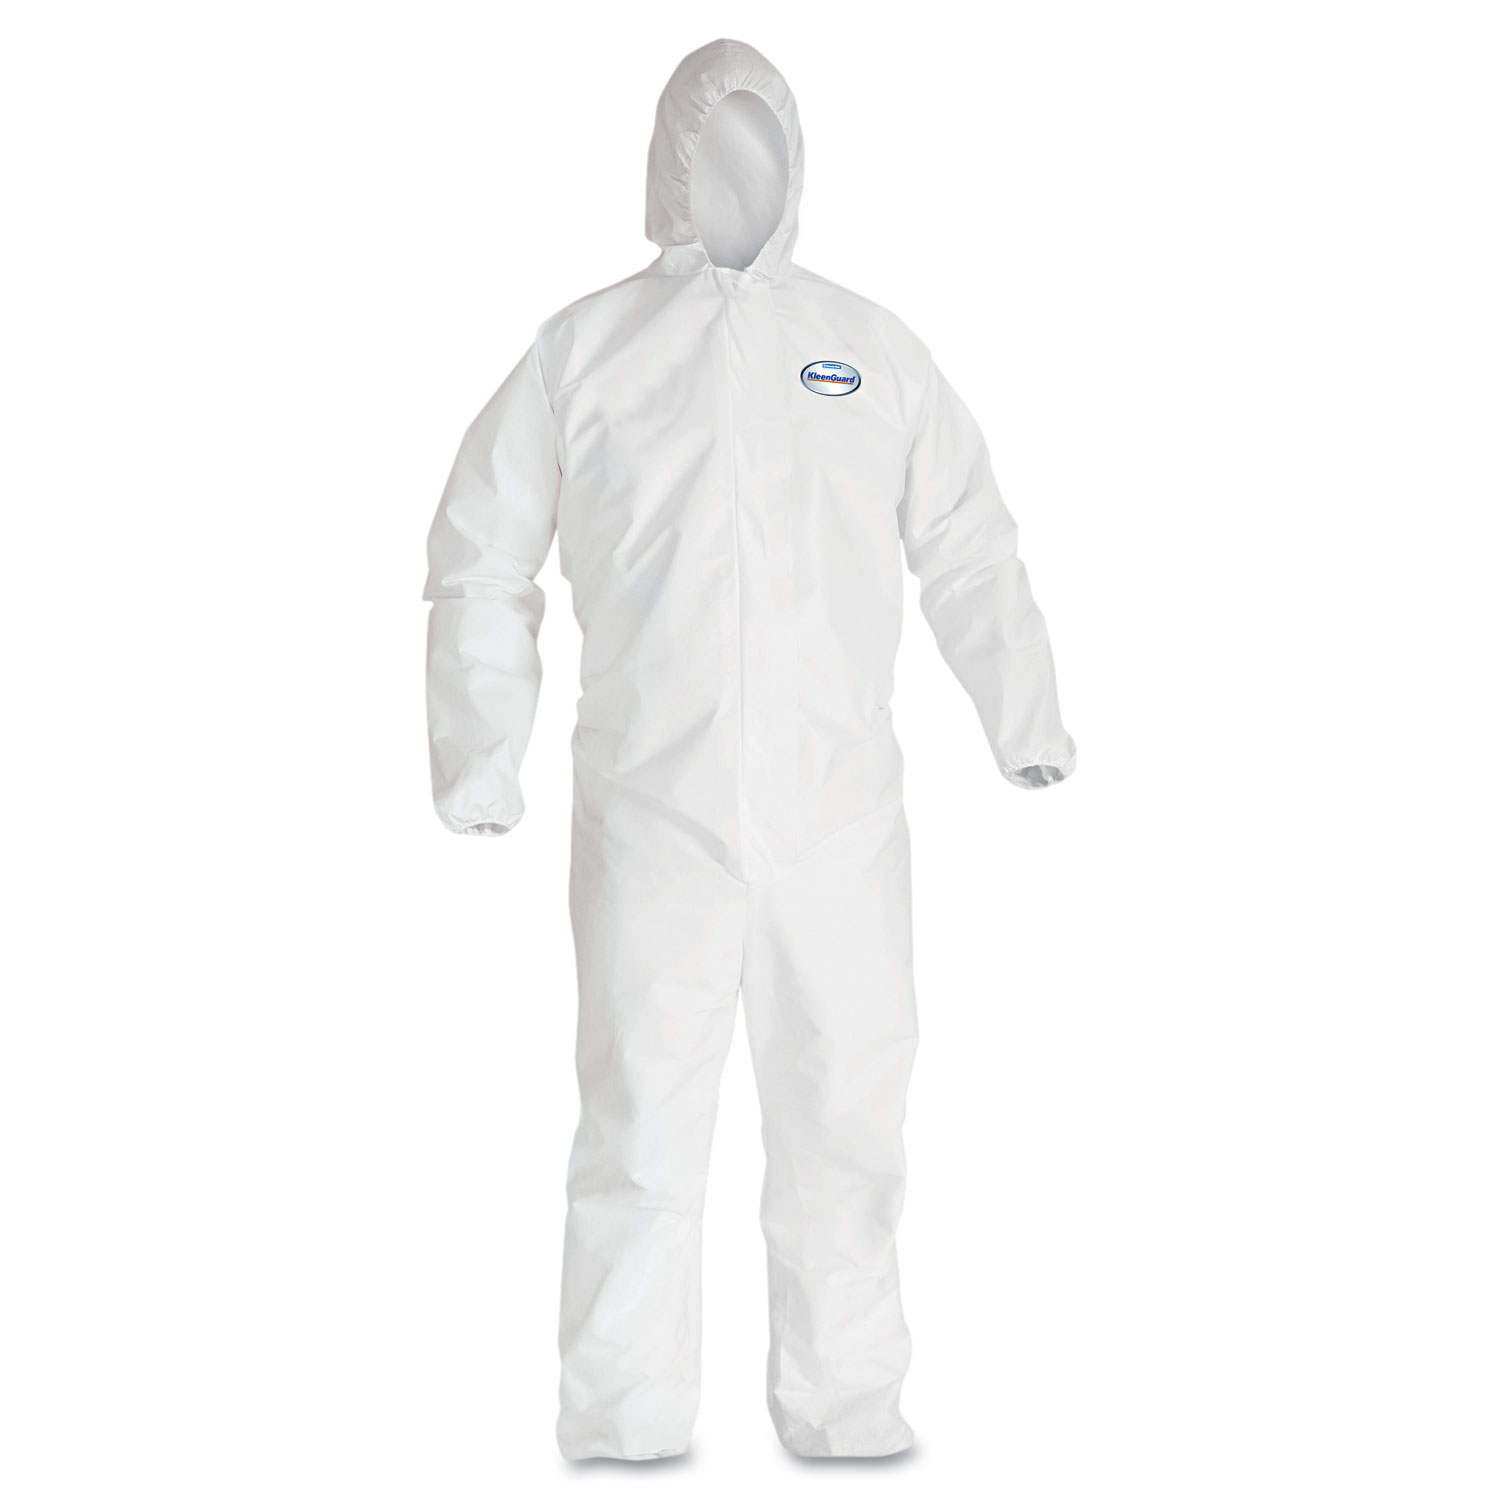 A30 Elastic-Back & Cuff Hooded Coveralls, White, 2X-Large, 25/Case